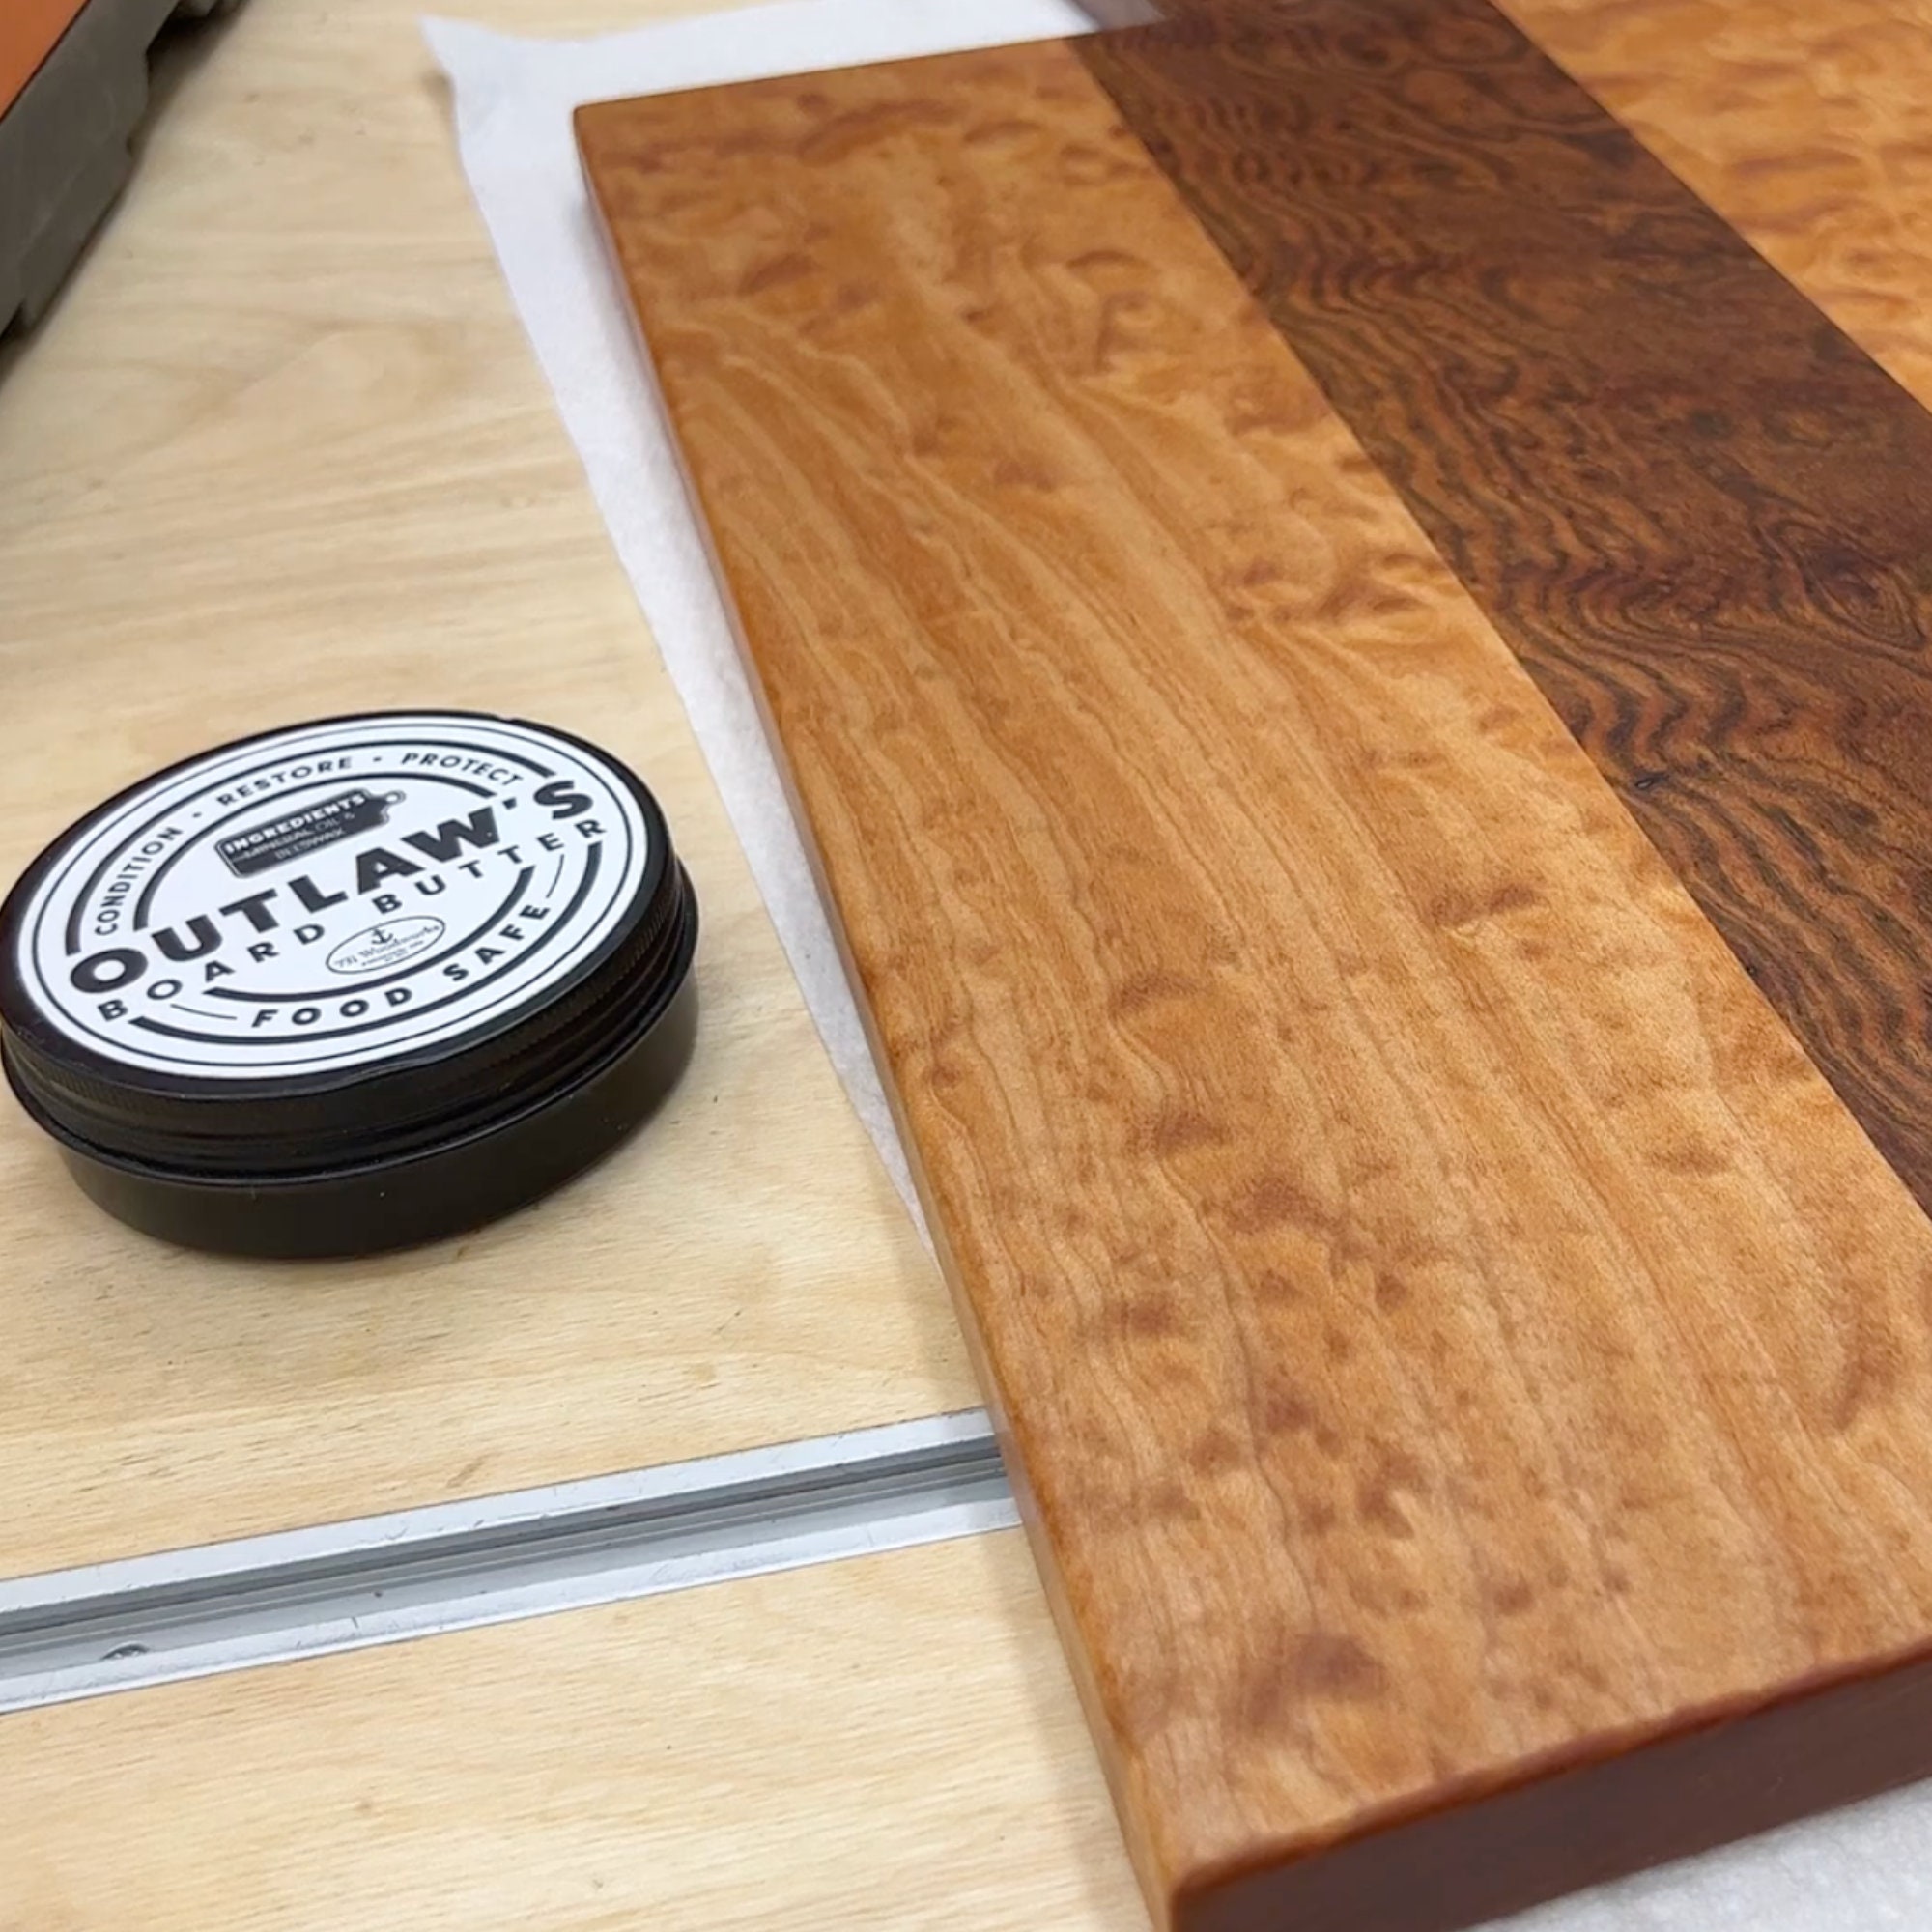 Food Safe Wood Finish for Cutting Boards, Charcuterie Boards and More  Solvent Free, Non Toxic Finish That Protects Wood 